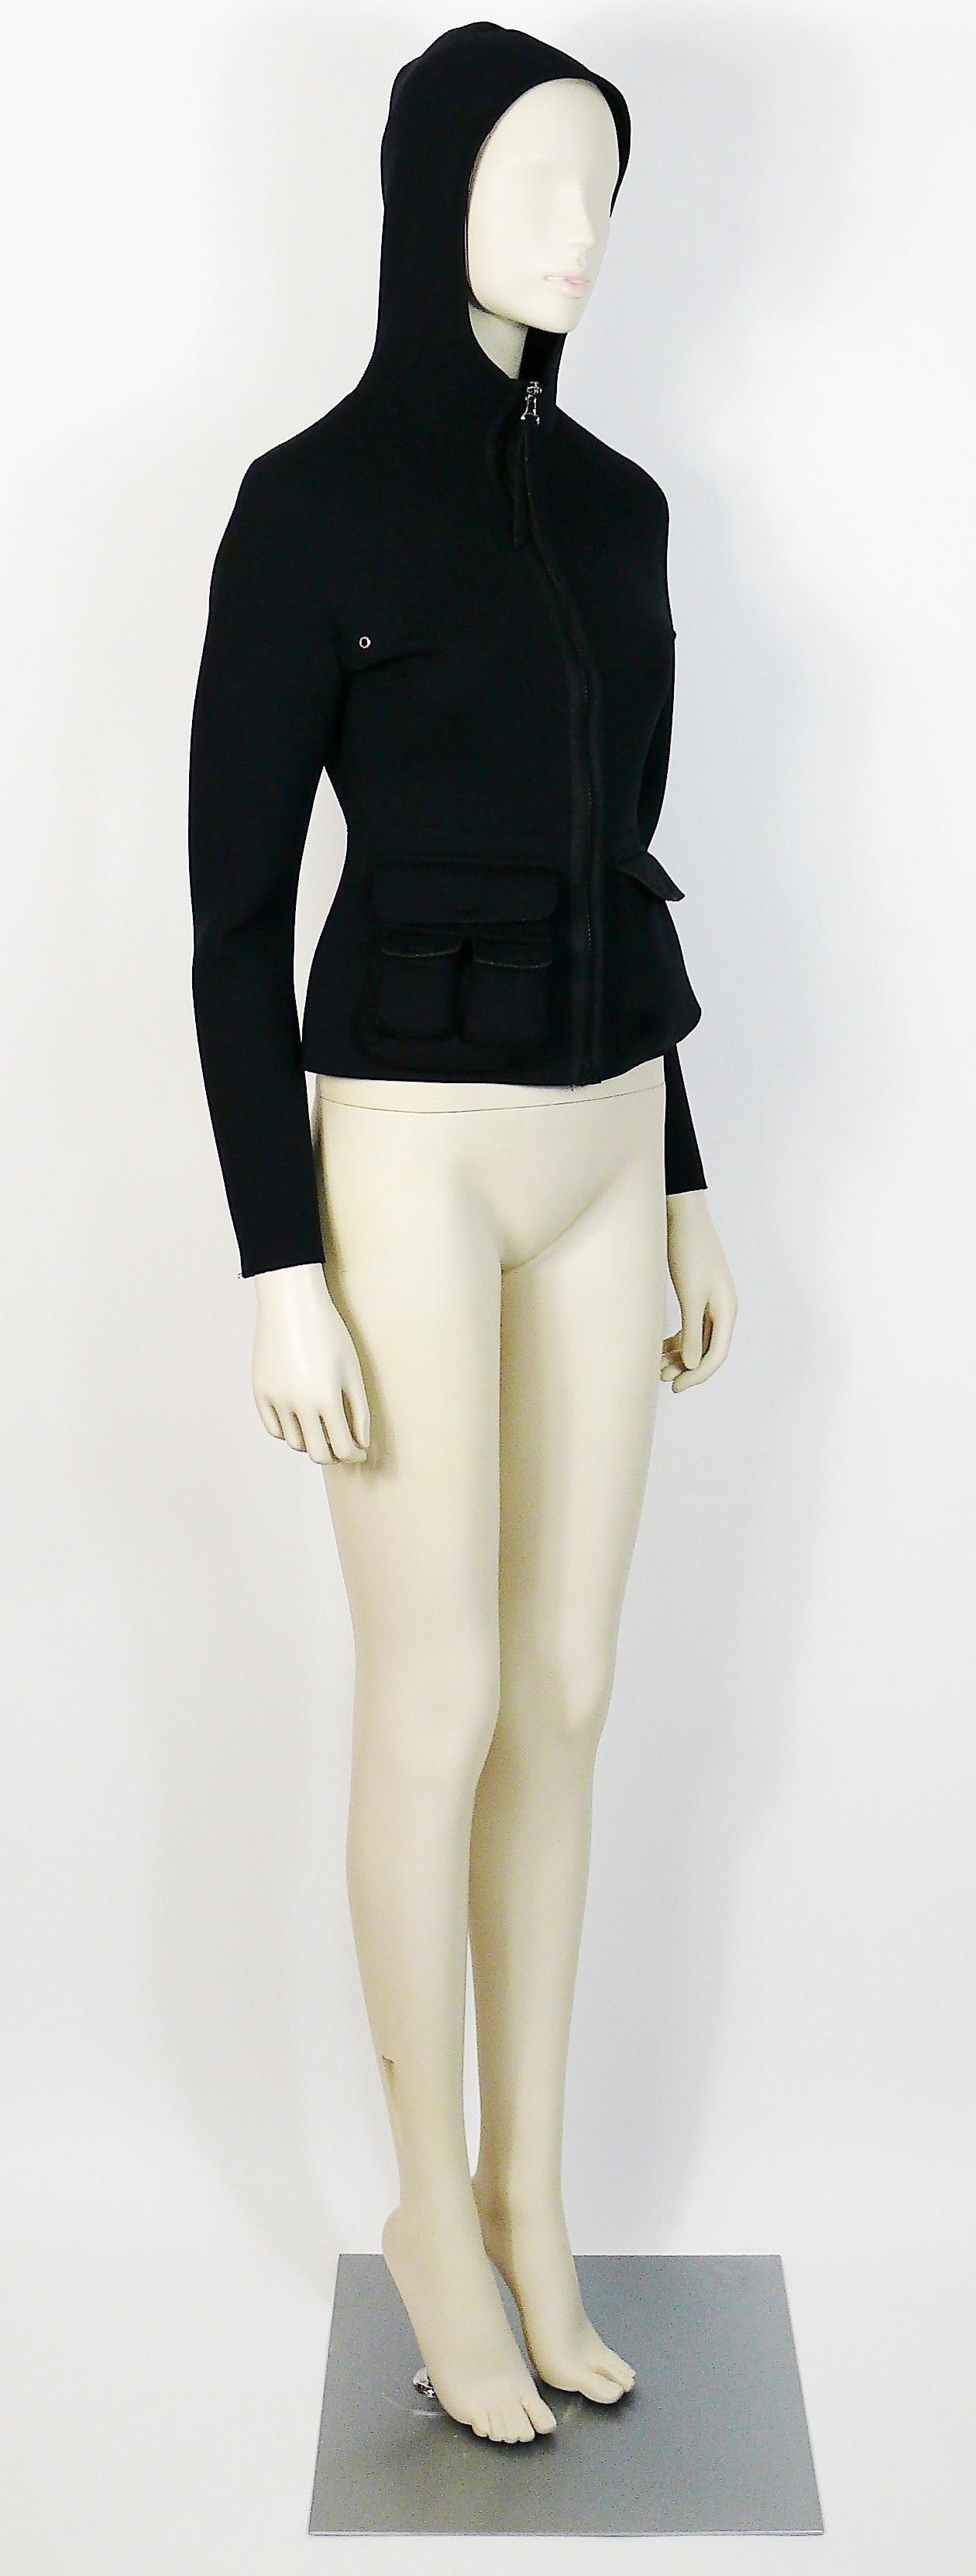 JEAN PAUL GAULTIER vintage black neoprene multi pocket hooded jacket.

Front zipper closure.
Pockets with velcro closure.
Stretchy fabric.

Label reads JPG JEAN'S.
Collection 0002.
Made in Italy.

Size tag reads S.
Please refer to